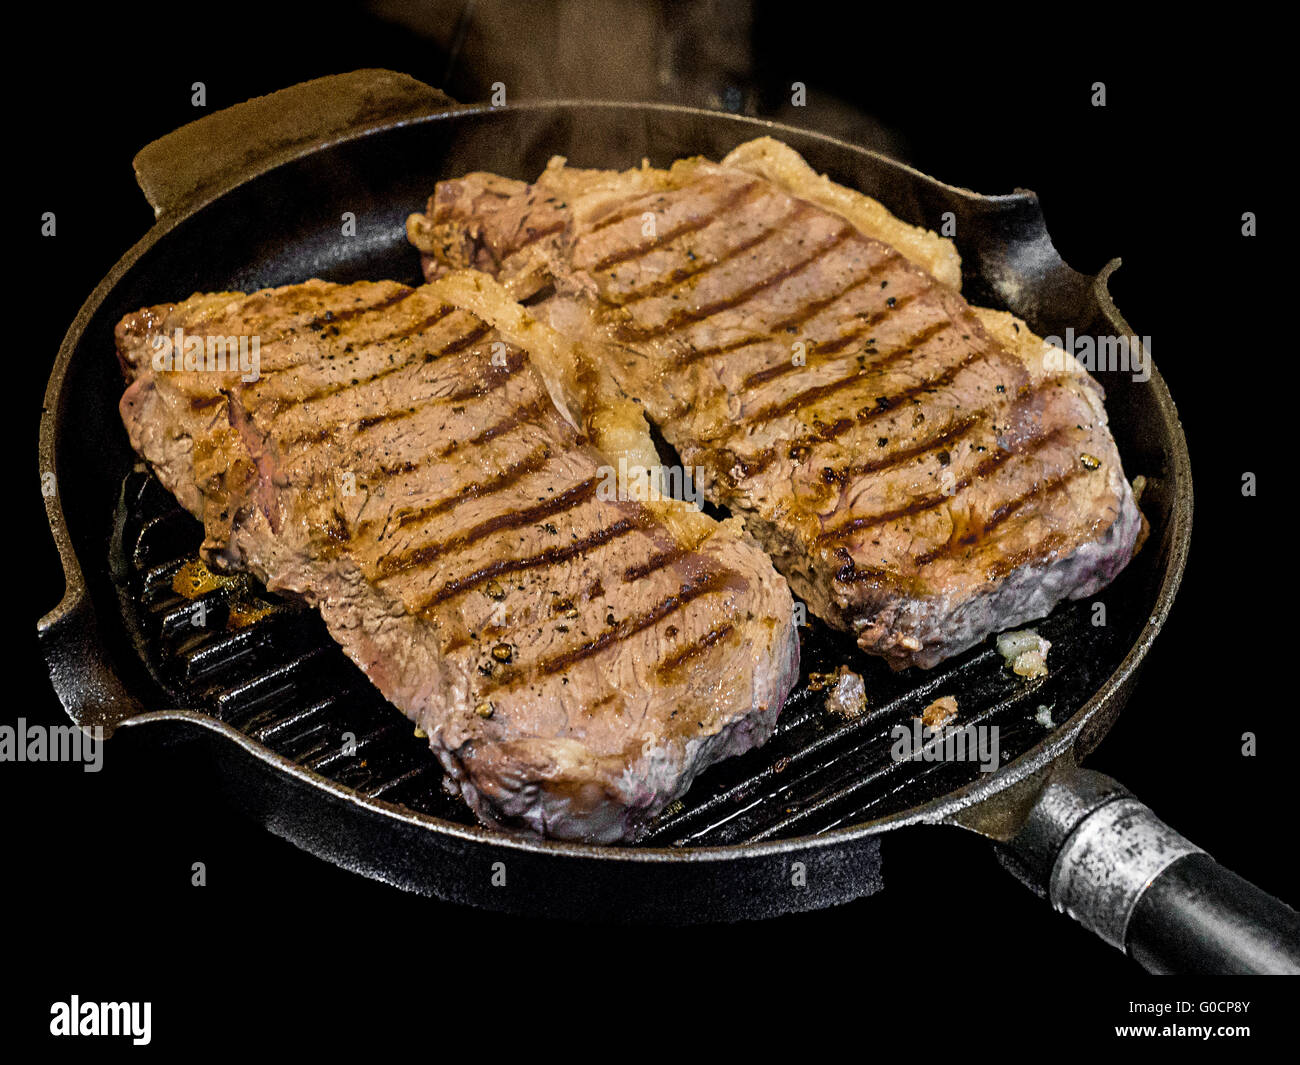 Sirloin steak to make your mouth water Stock Photo